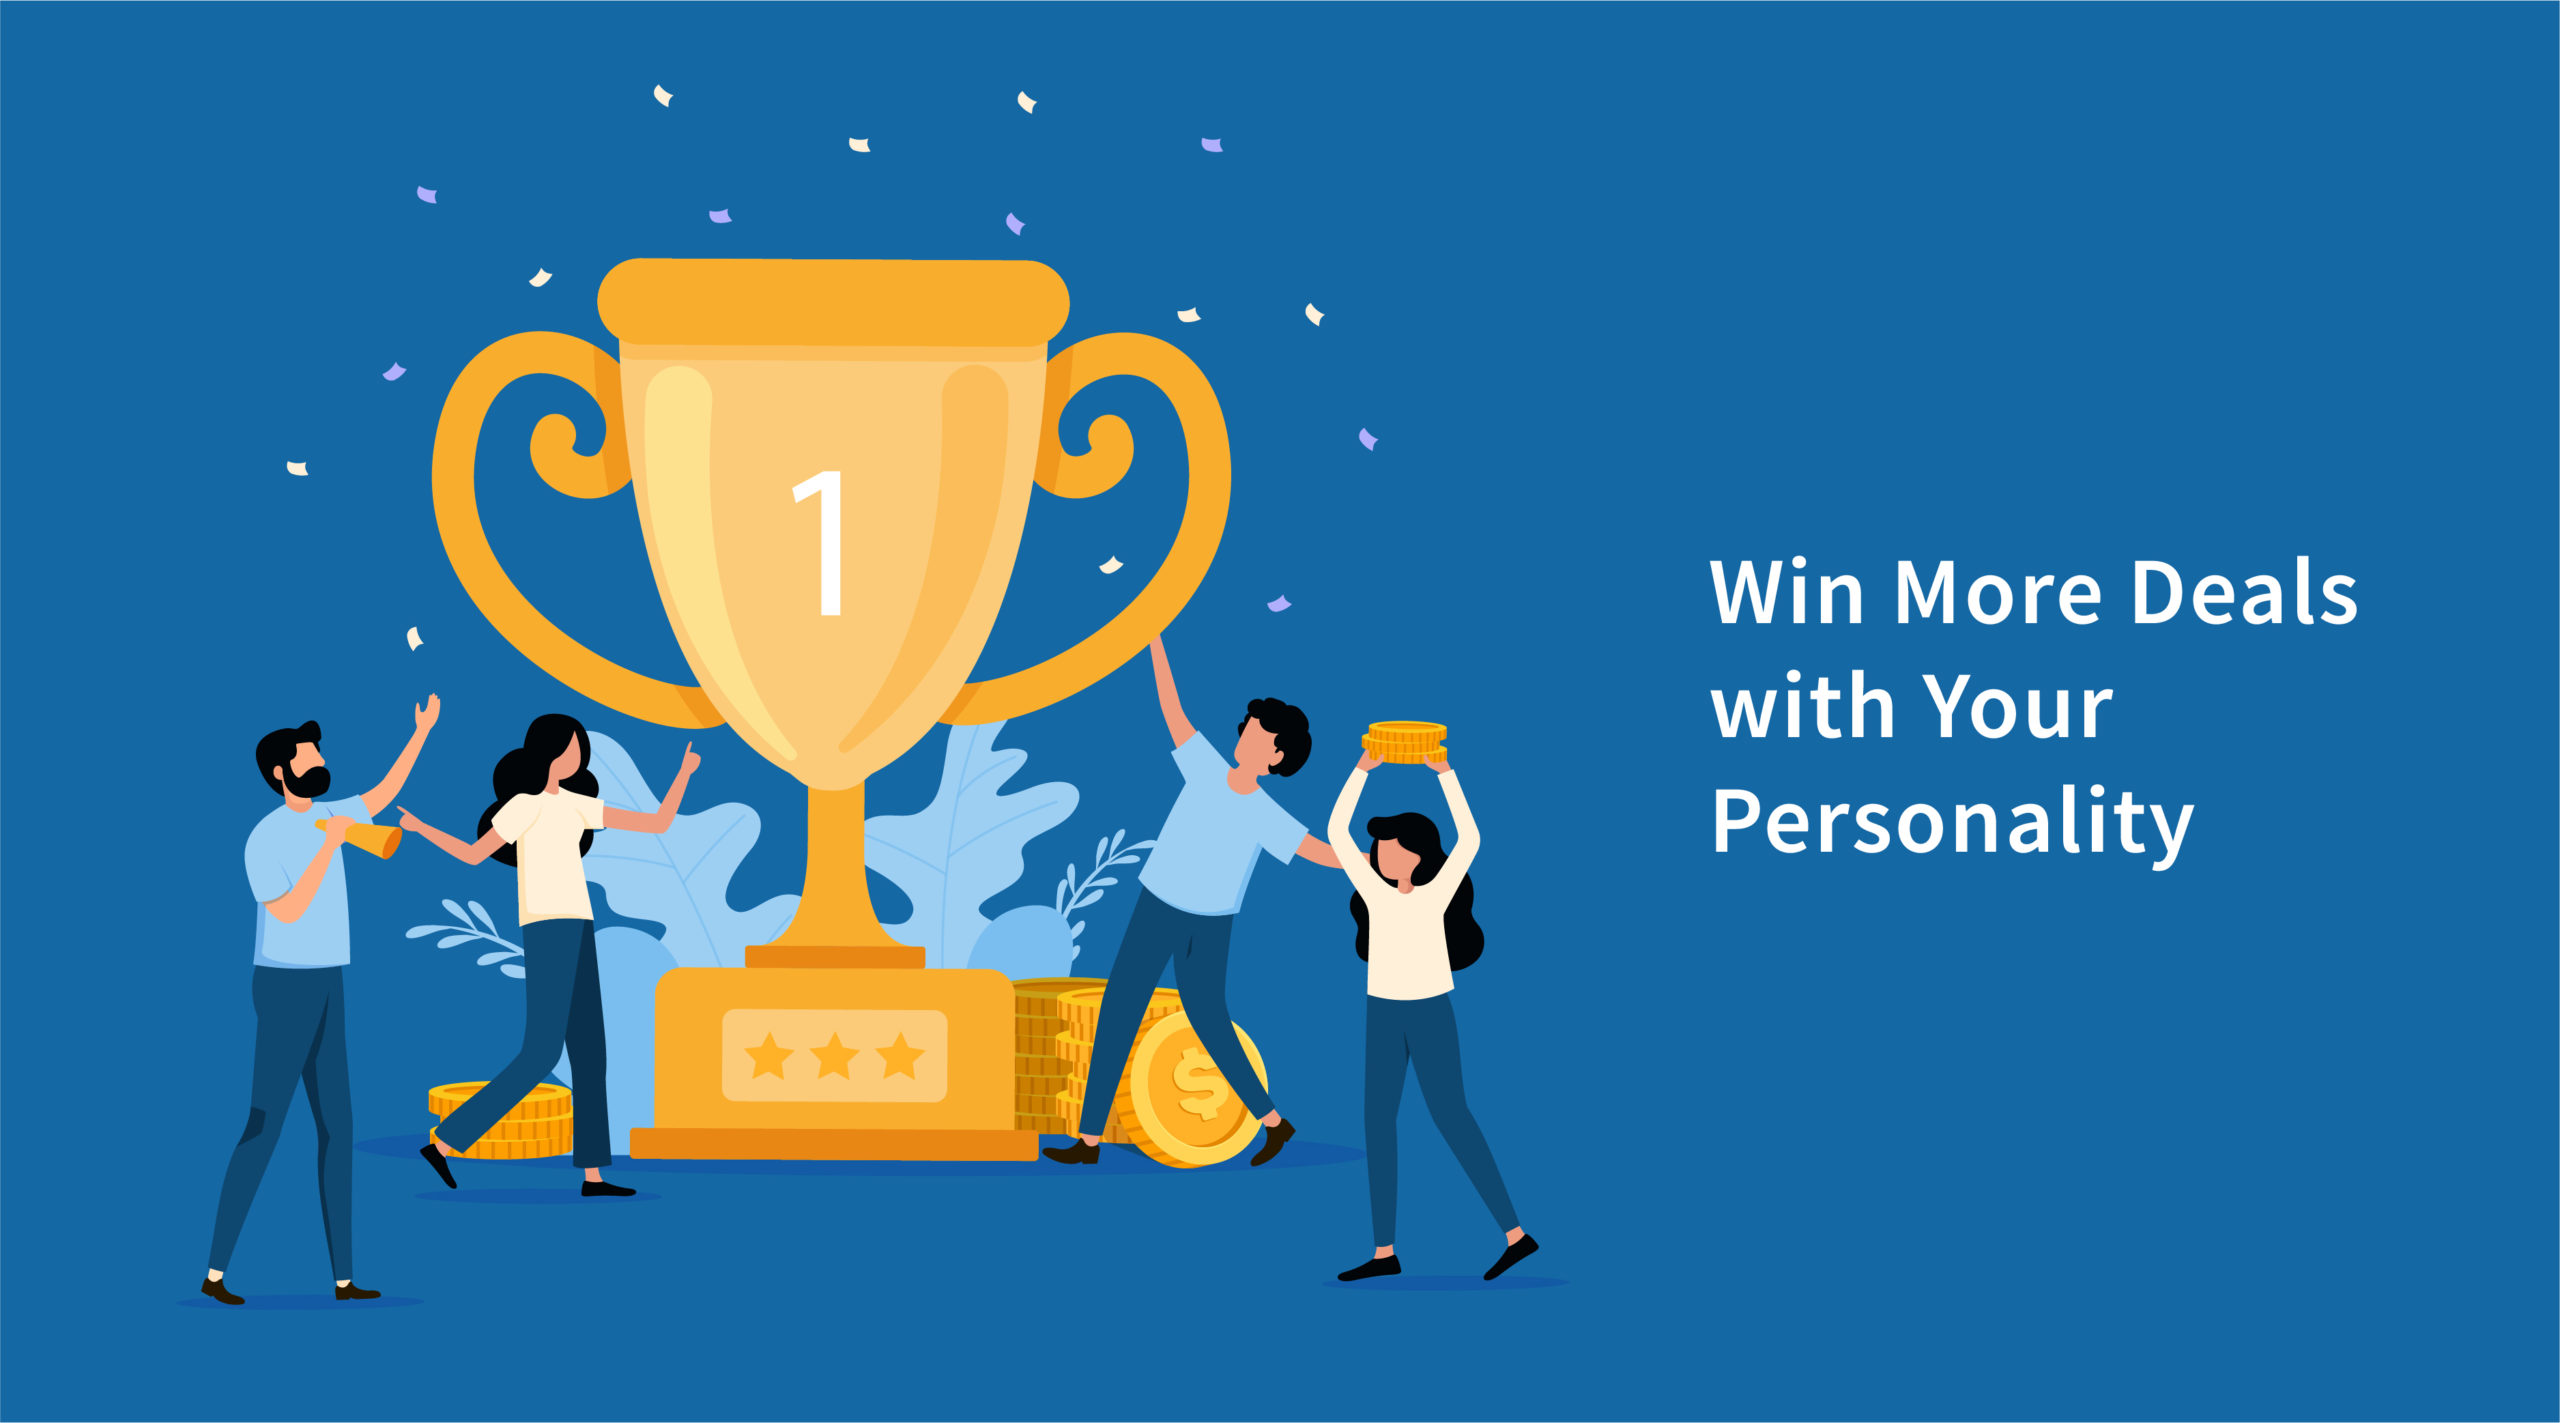 Win More Deals with Your Personality